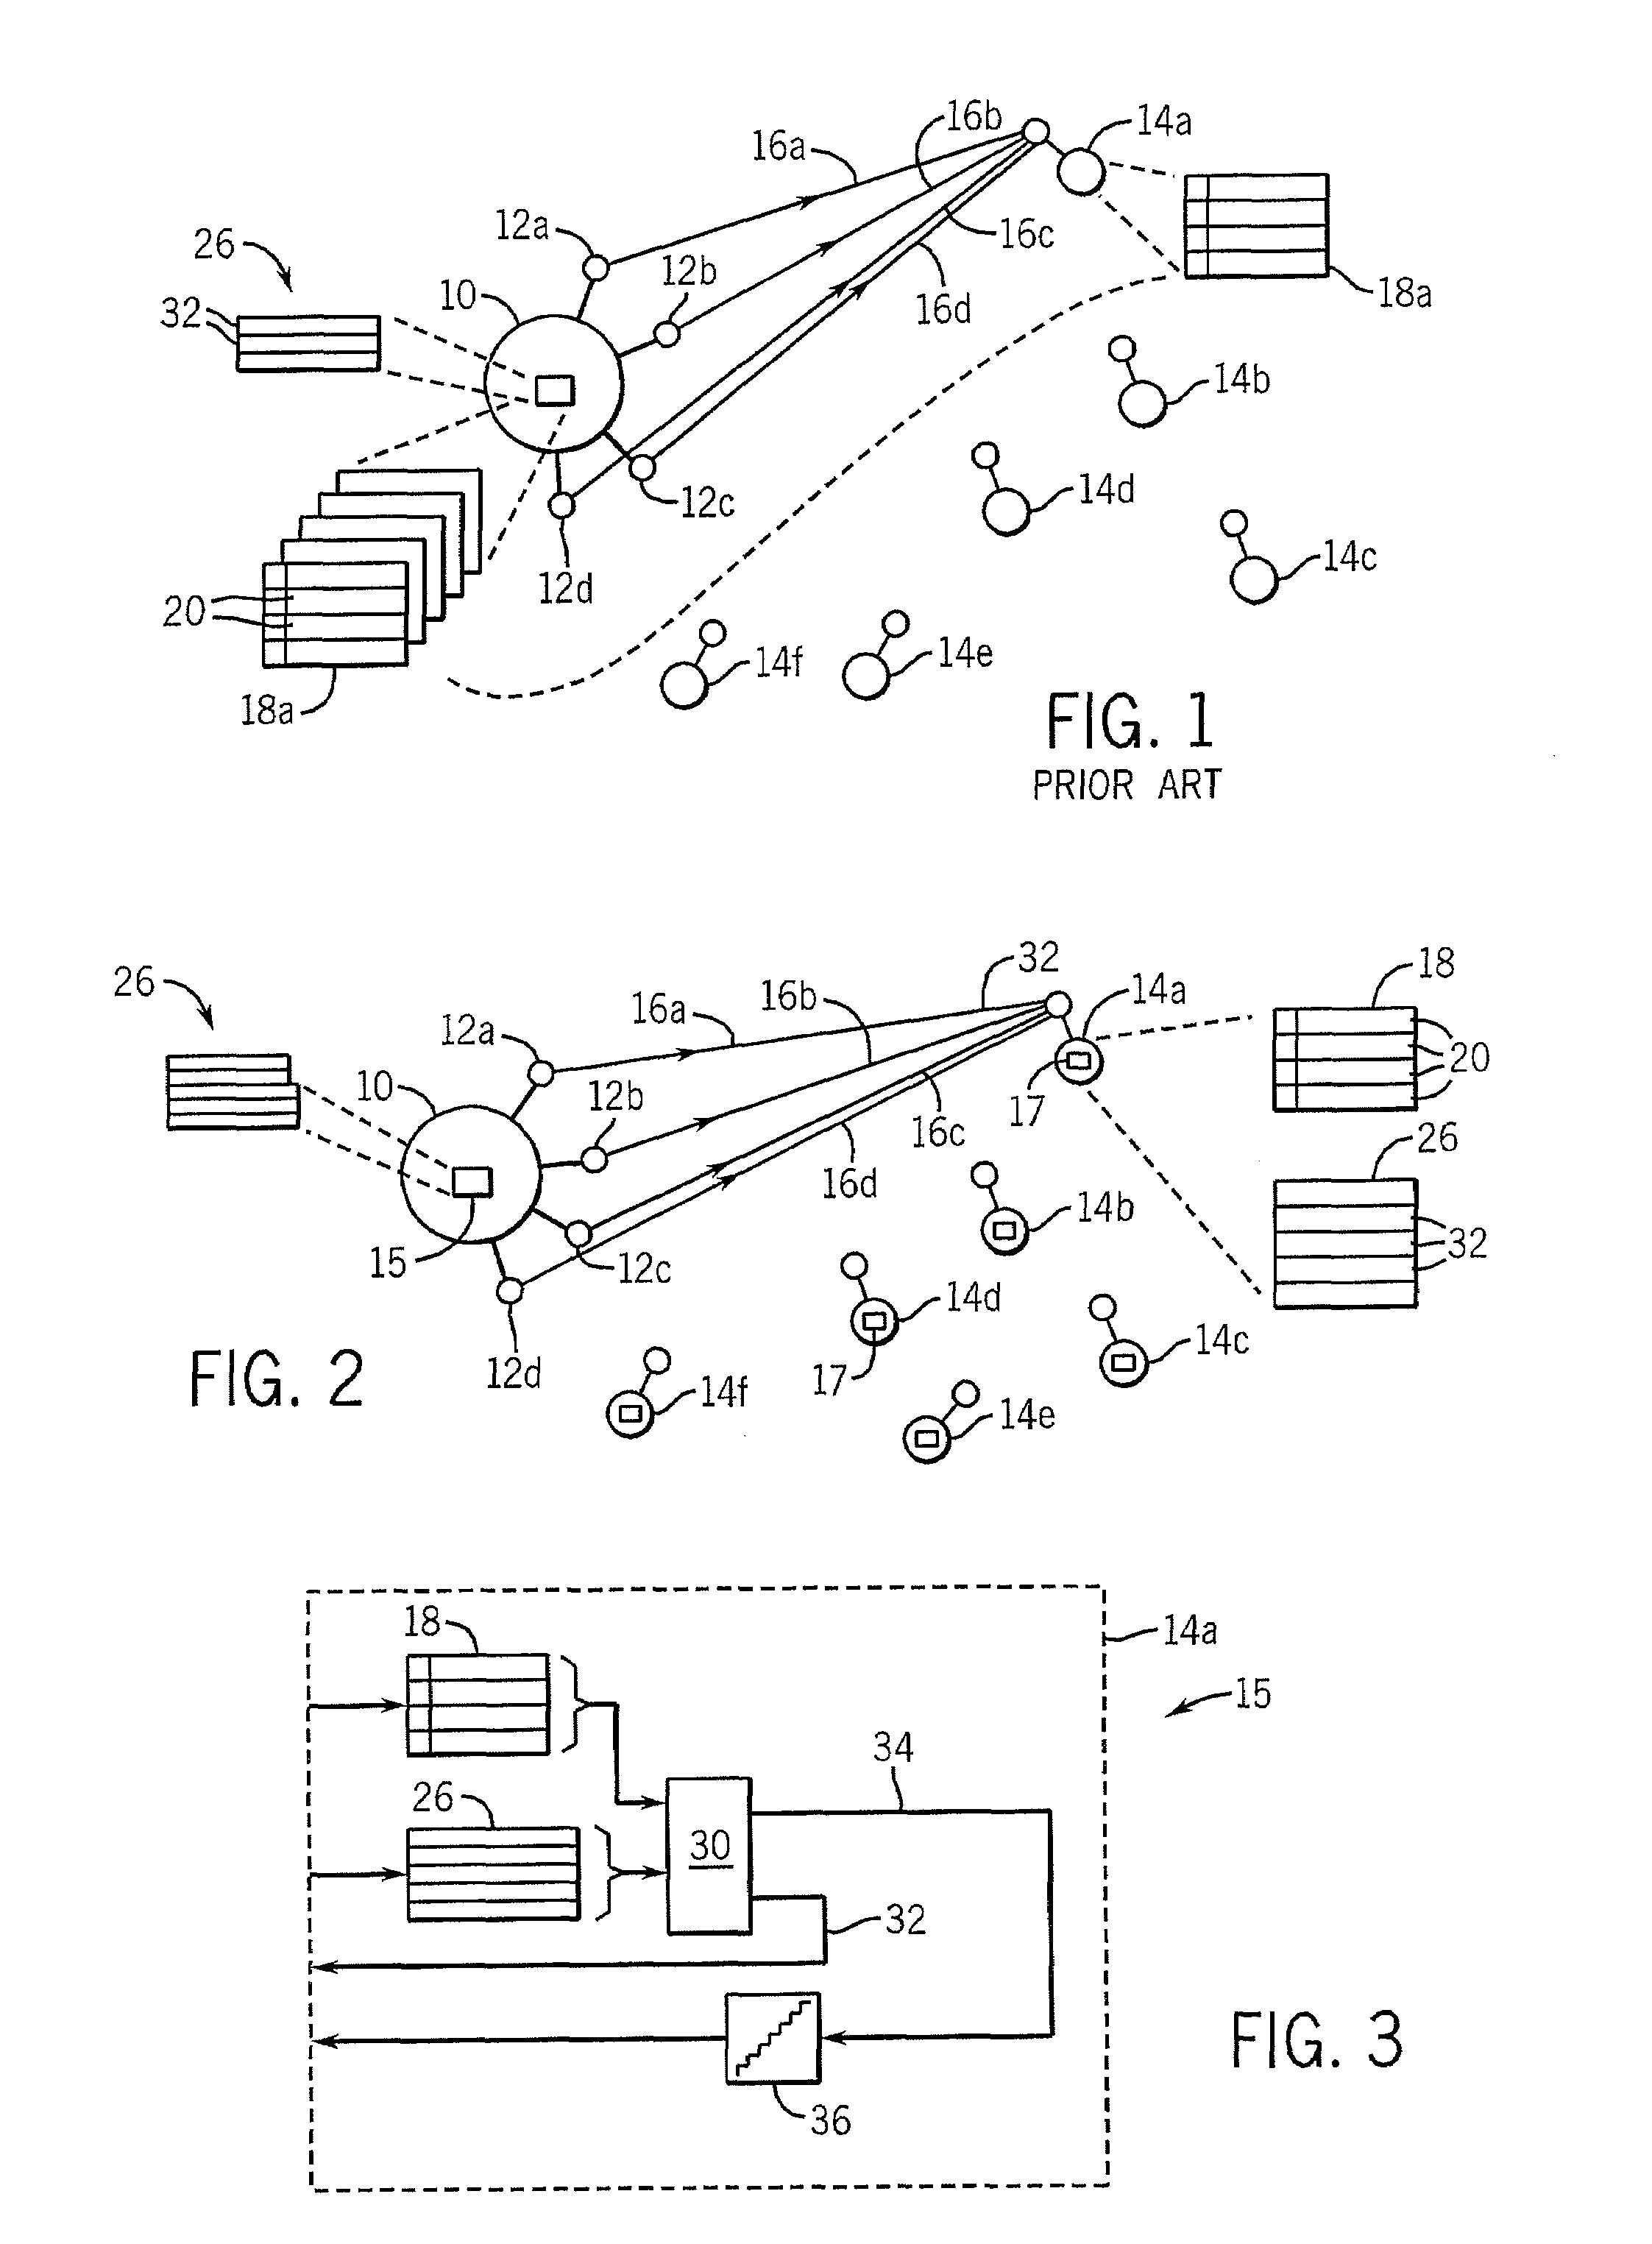 Distributed scheduling method for multi-antenna wireless system